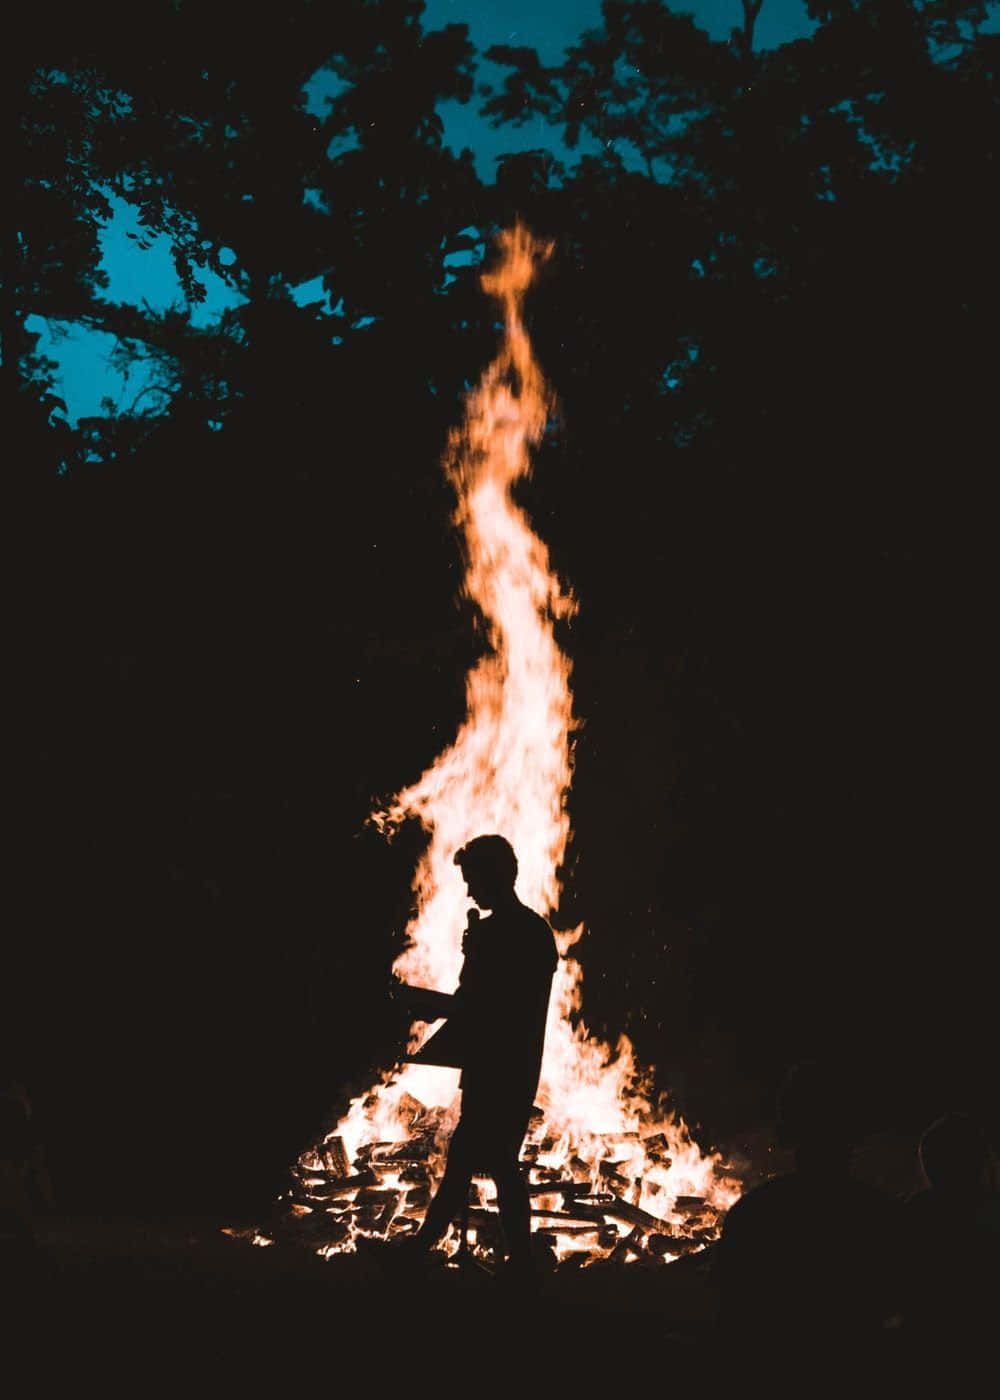 A man standing in front of a fire - Fire